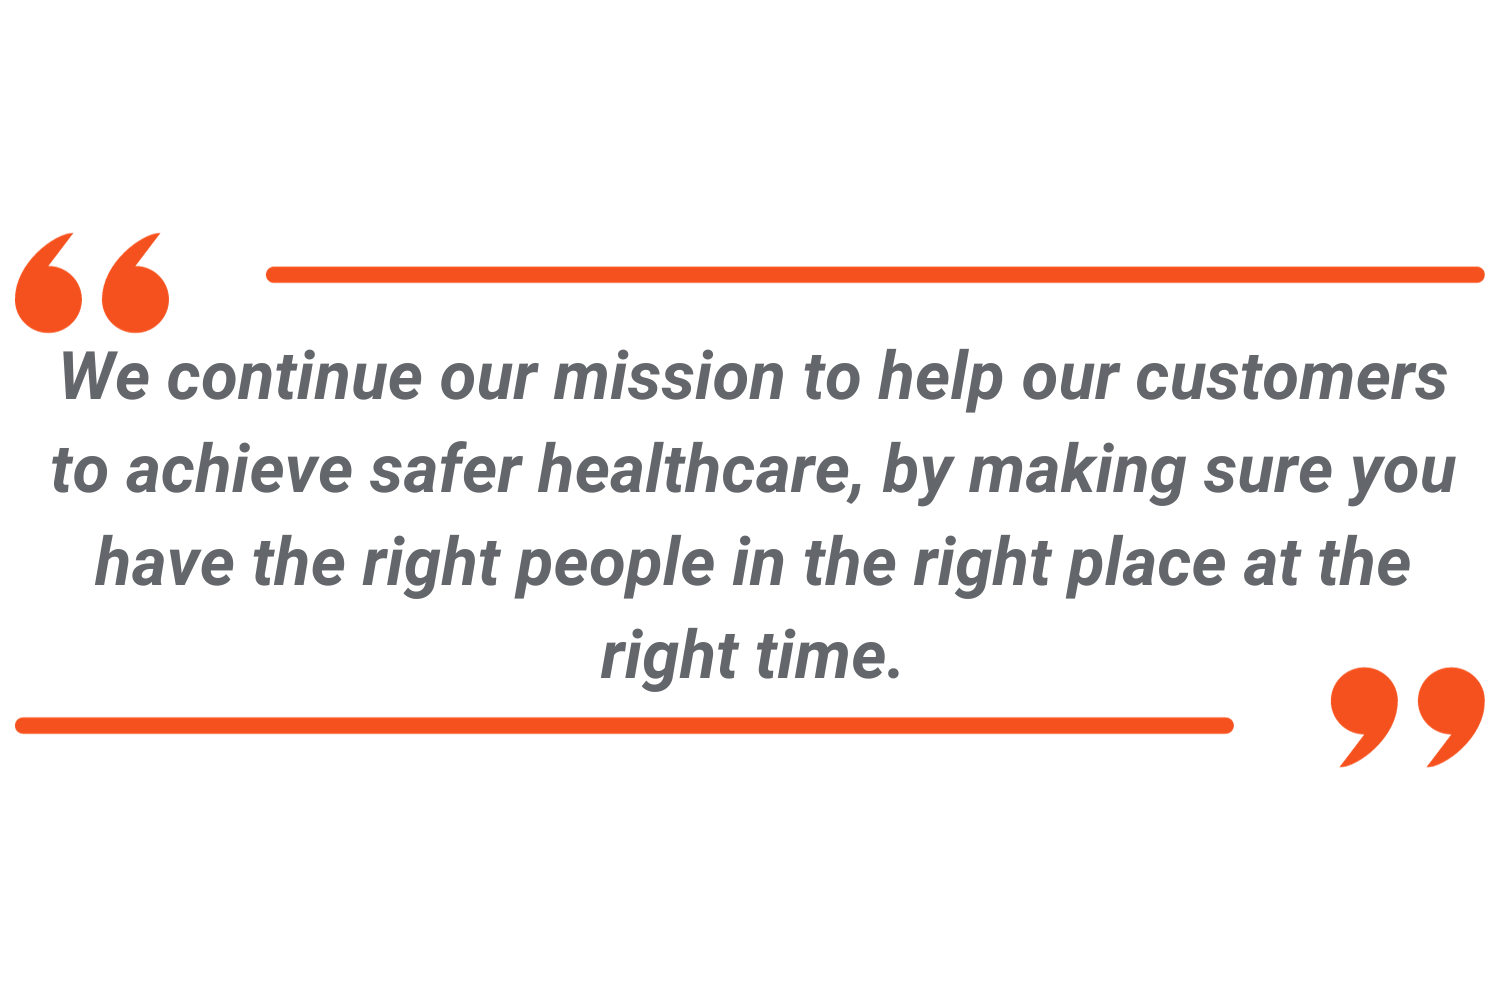 We continue our mission to help our customers to achieve safer healthcare, by making sure you have the right people in the right place at the right time.